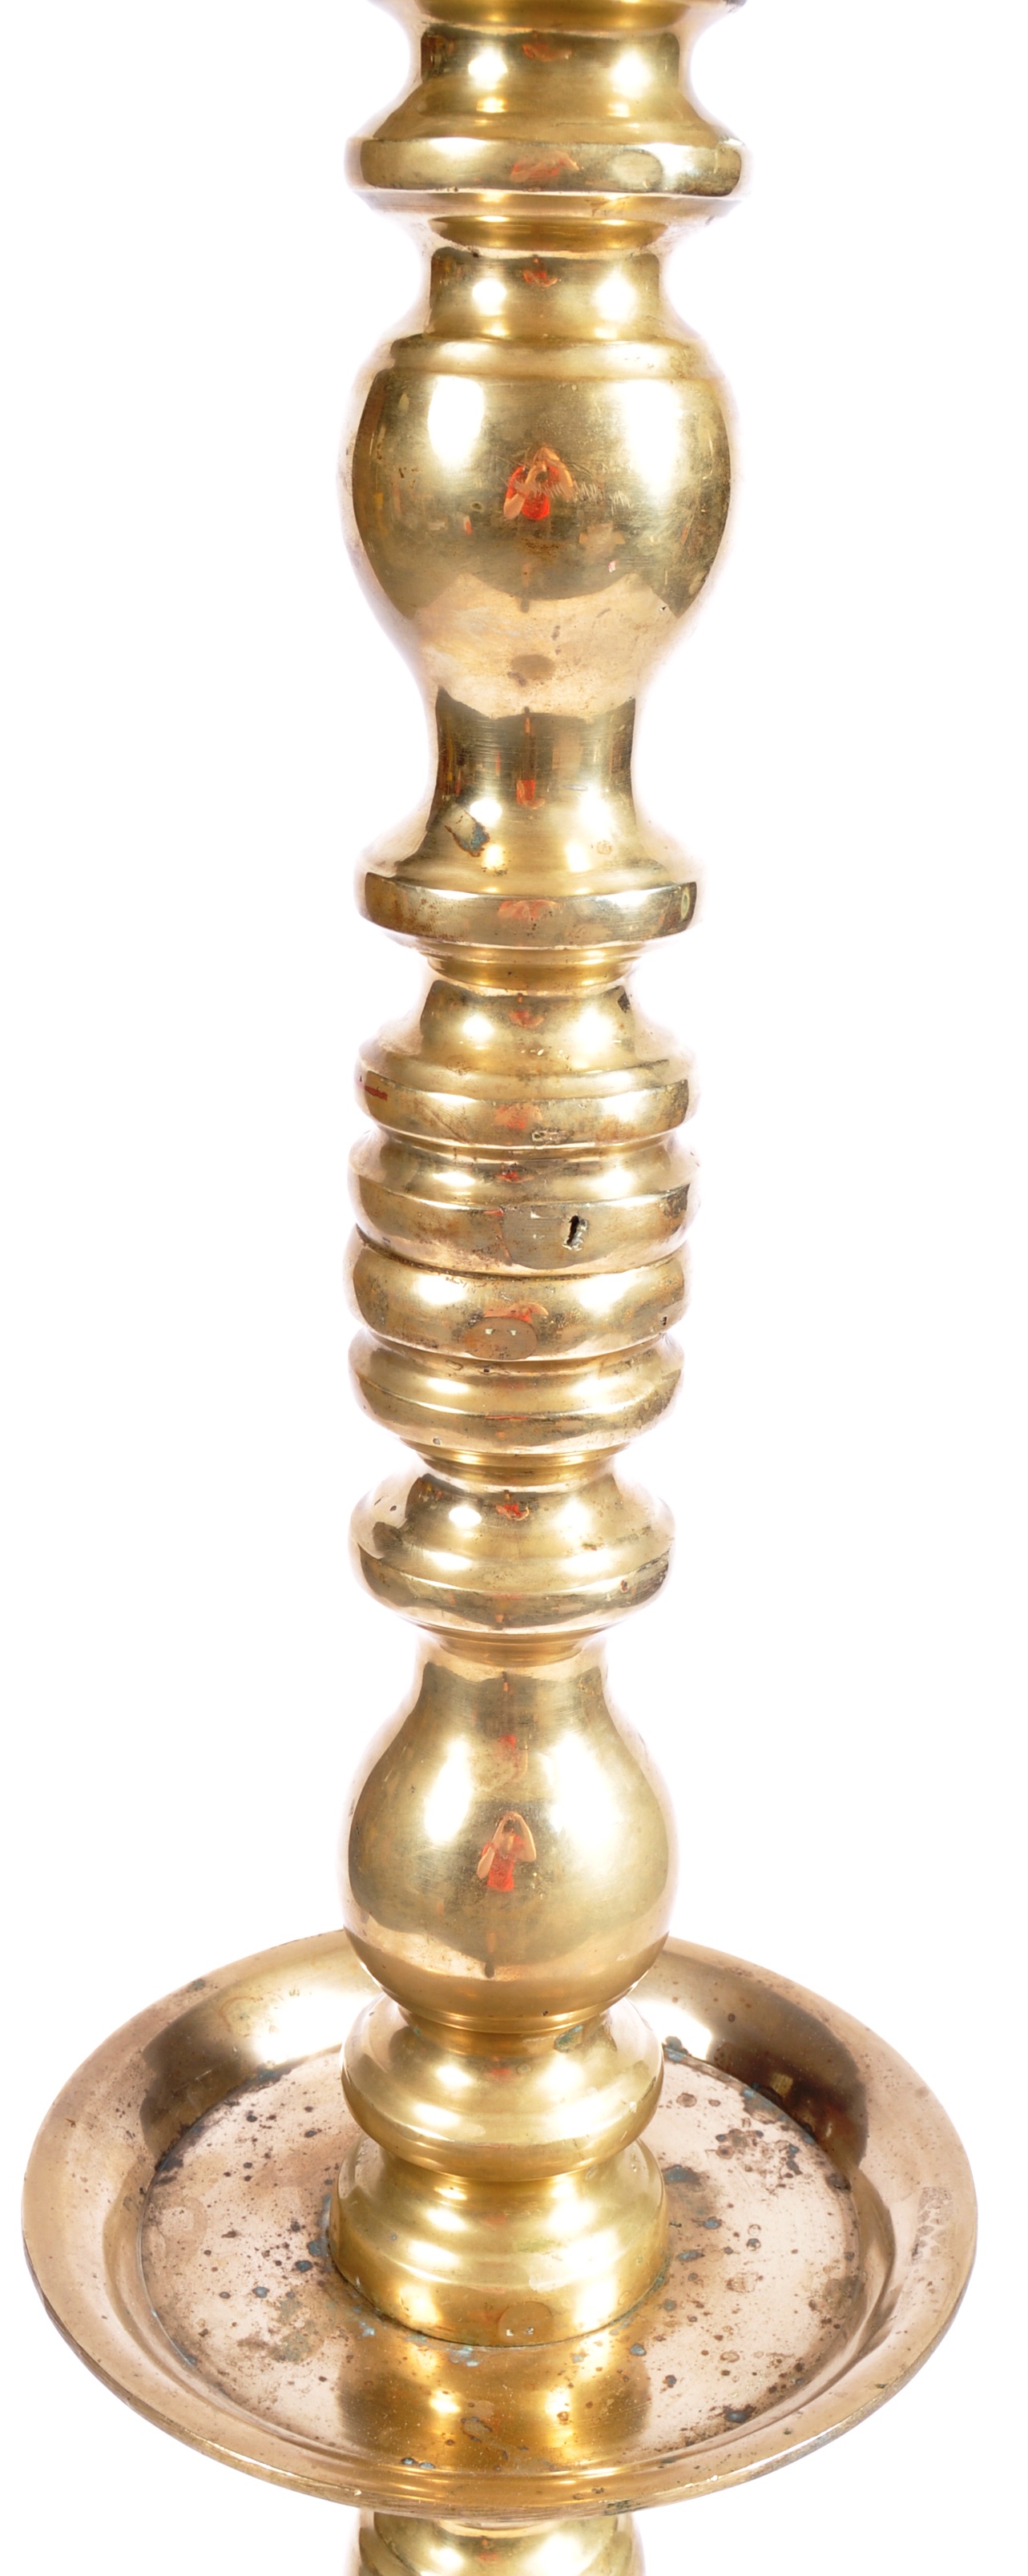 LARGE HEAVY FLOOR STANDING DUTCH CANDLESTICK - Image 3 of 6